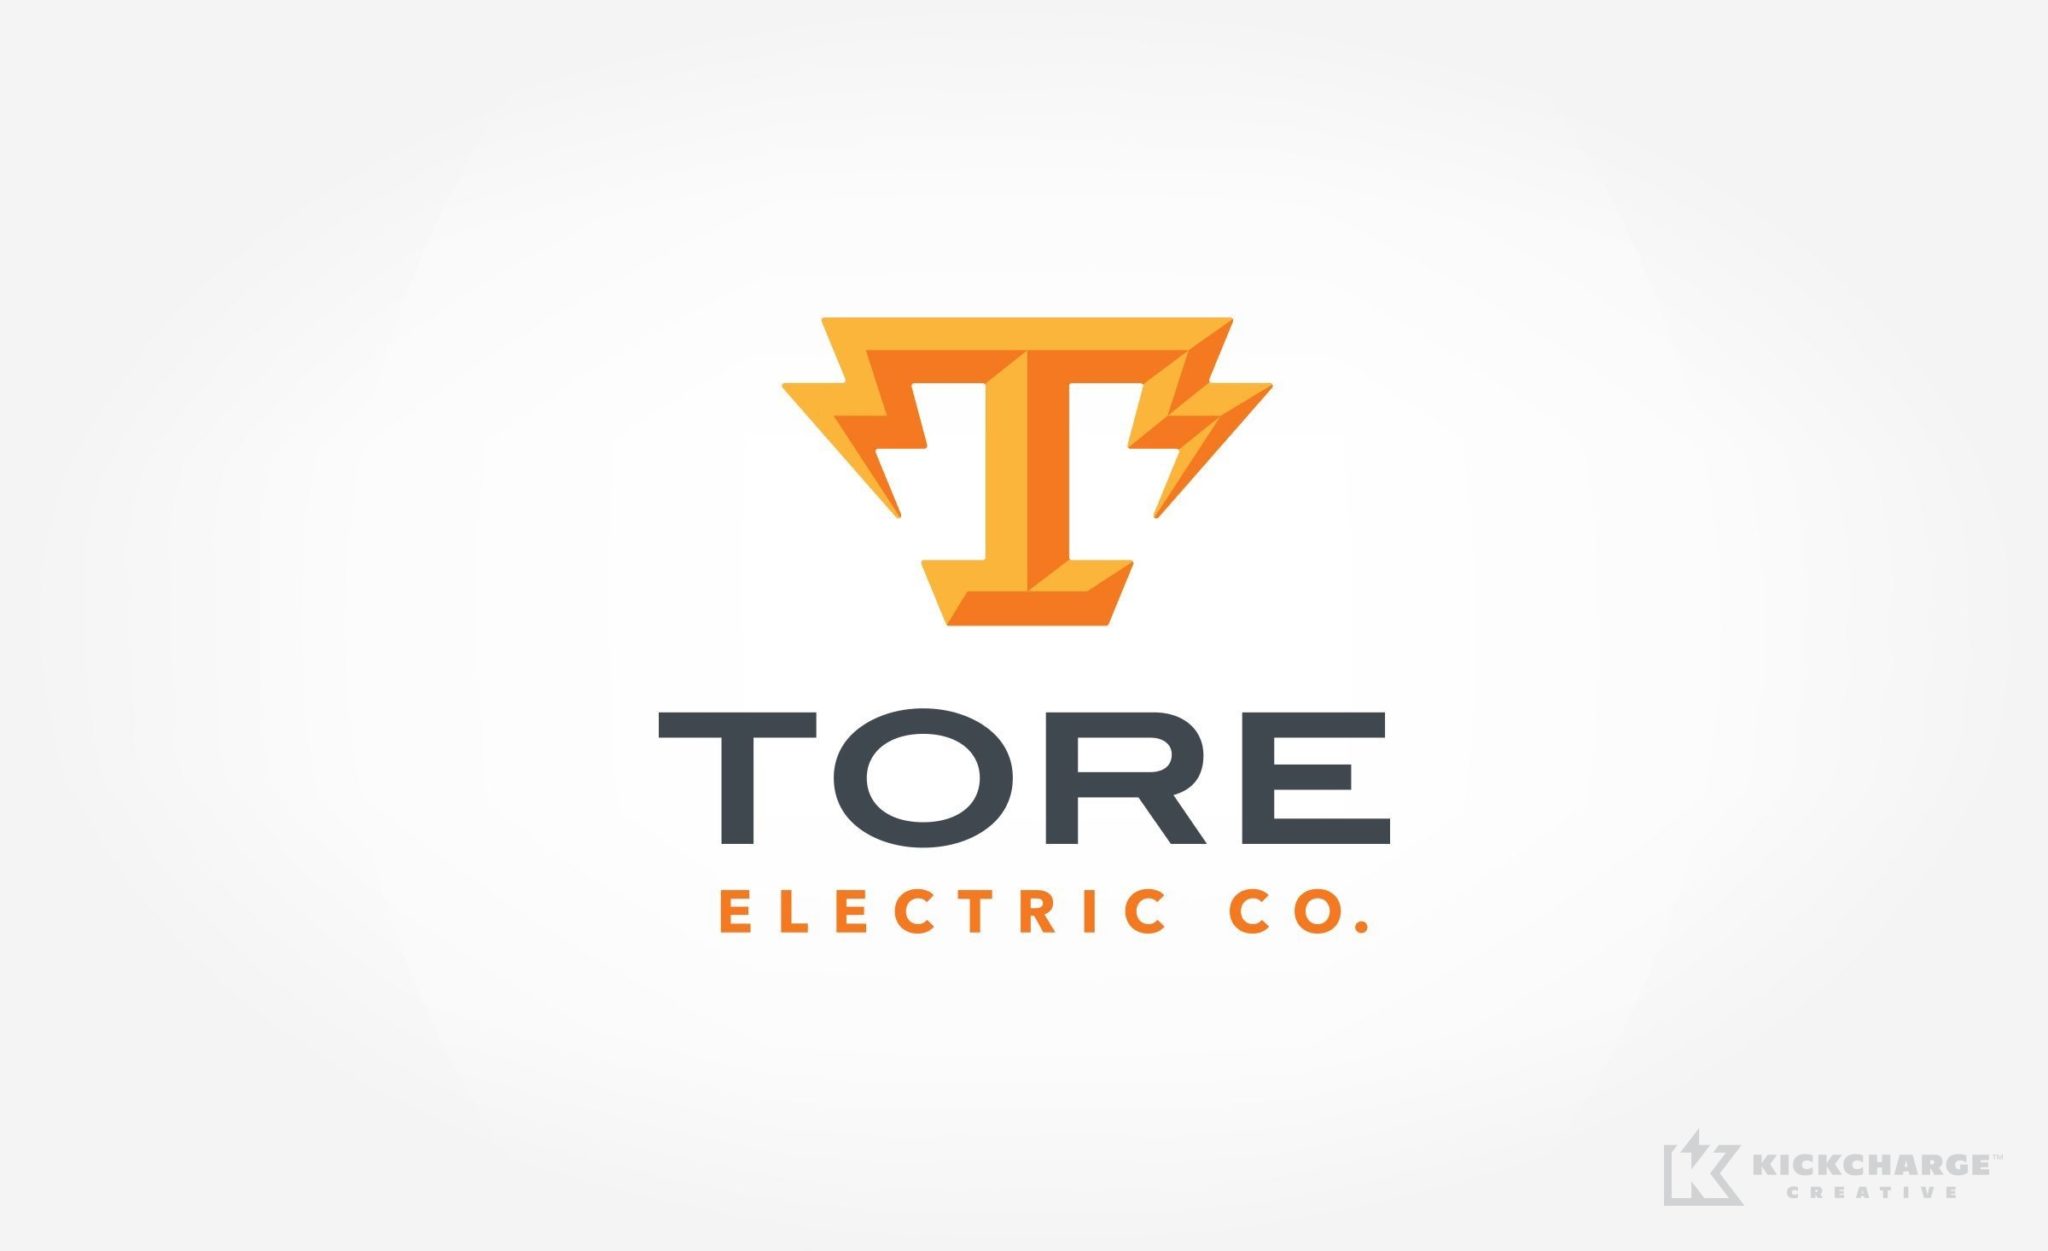 Tore Electric Co.